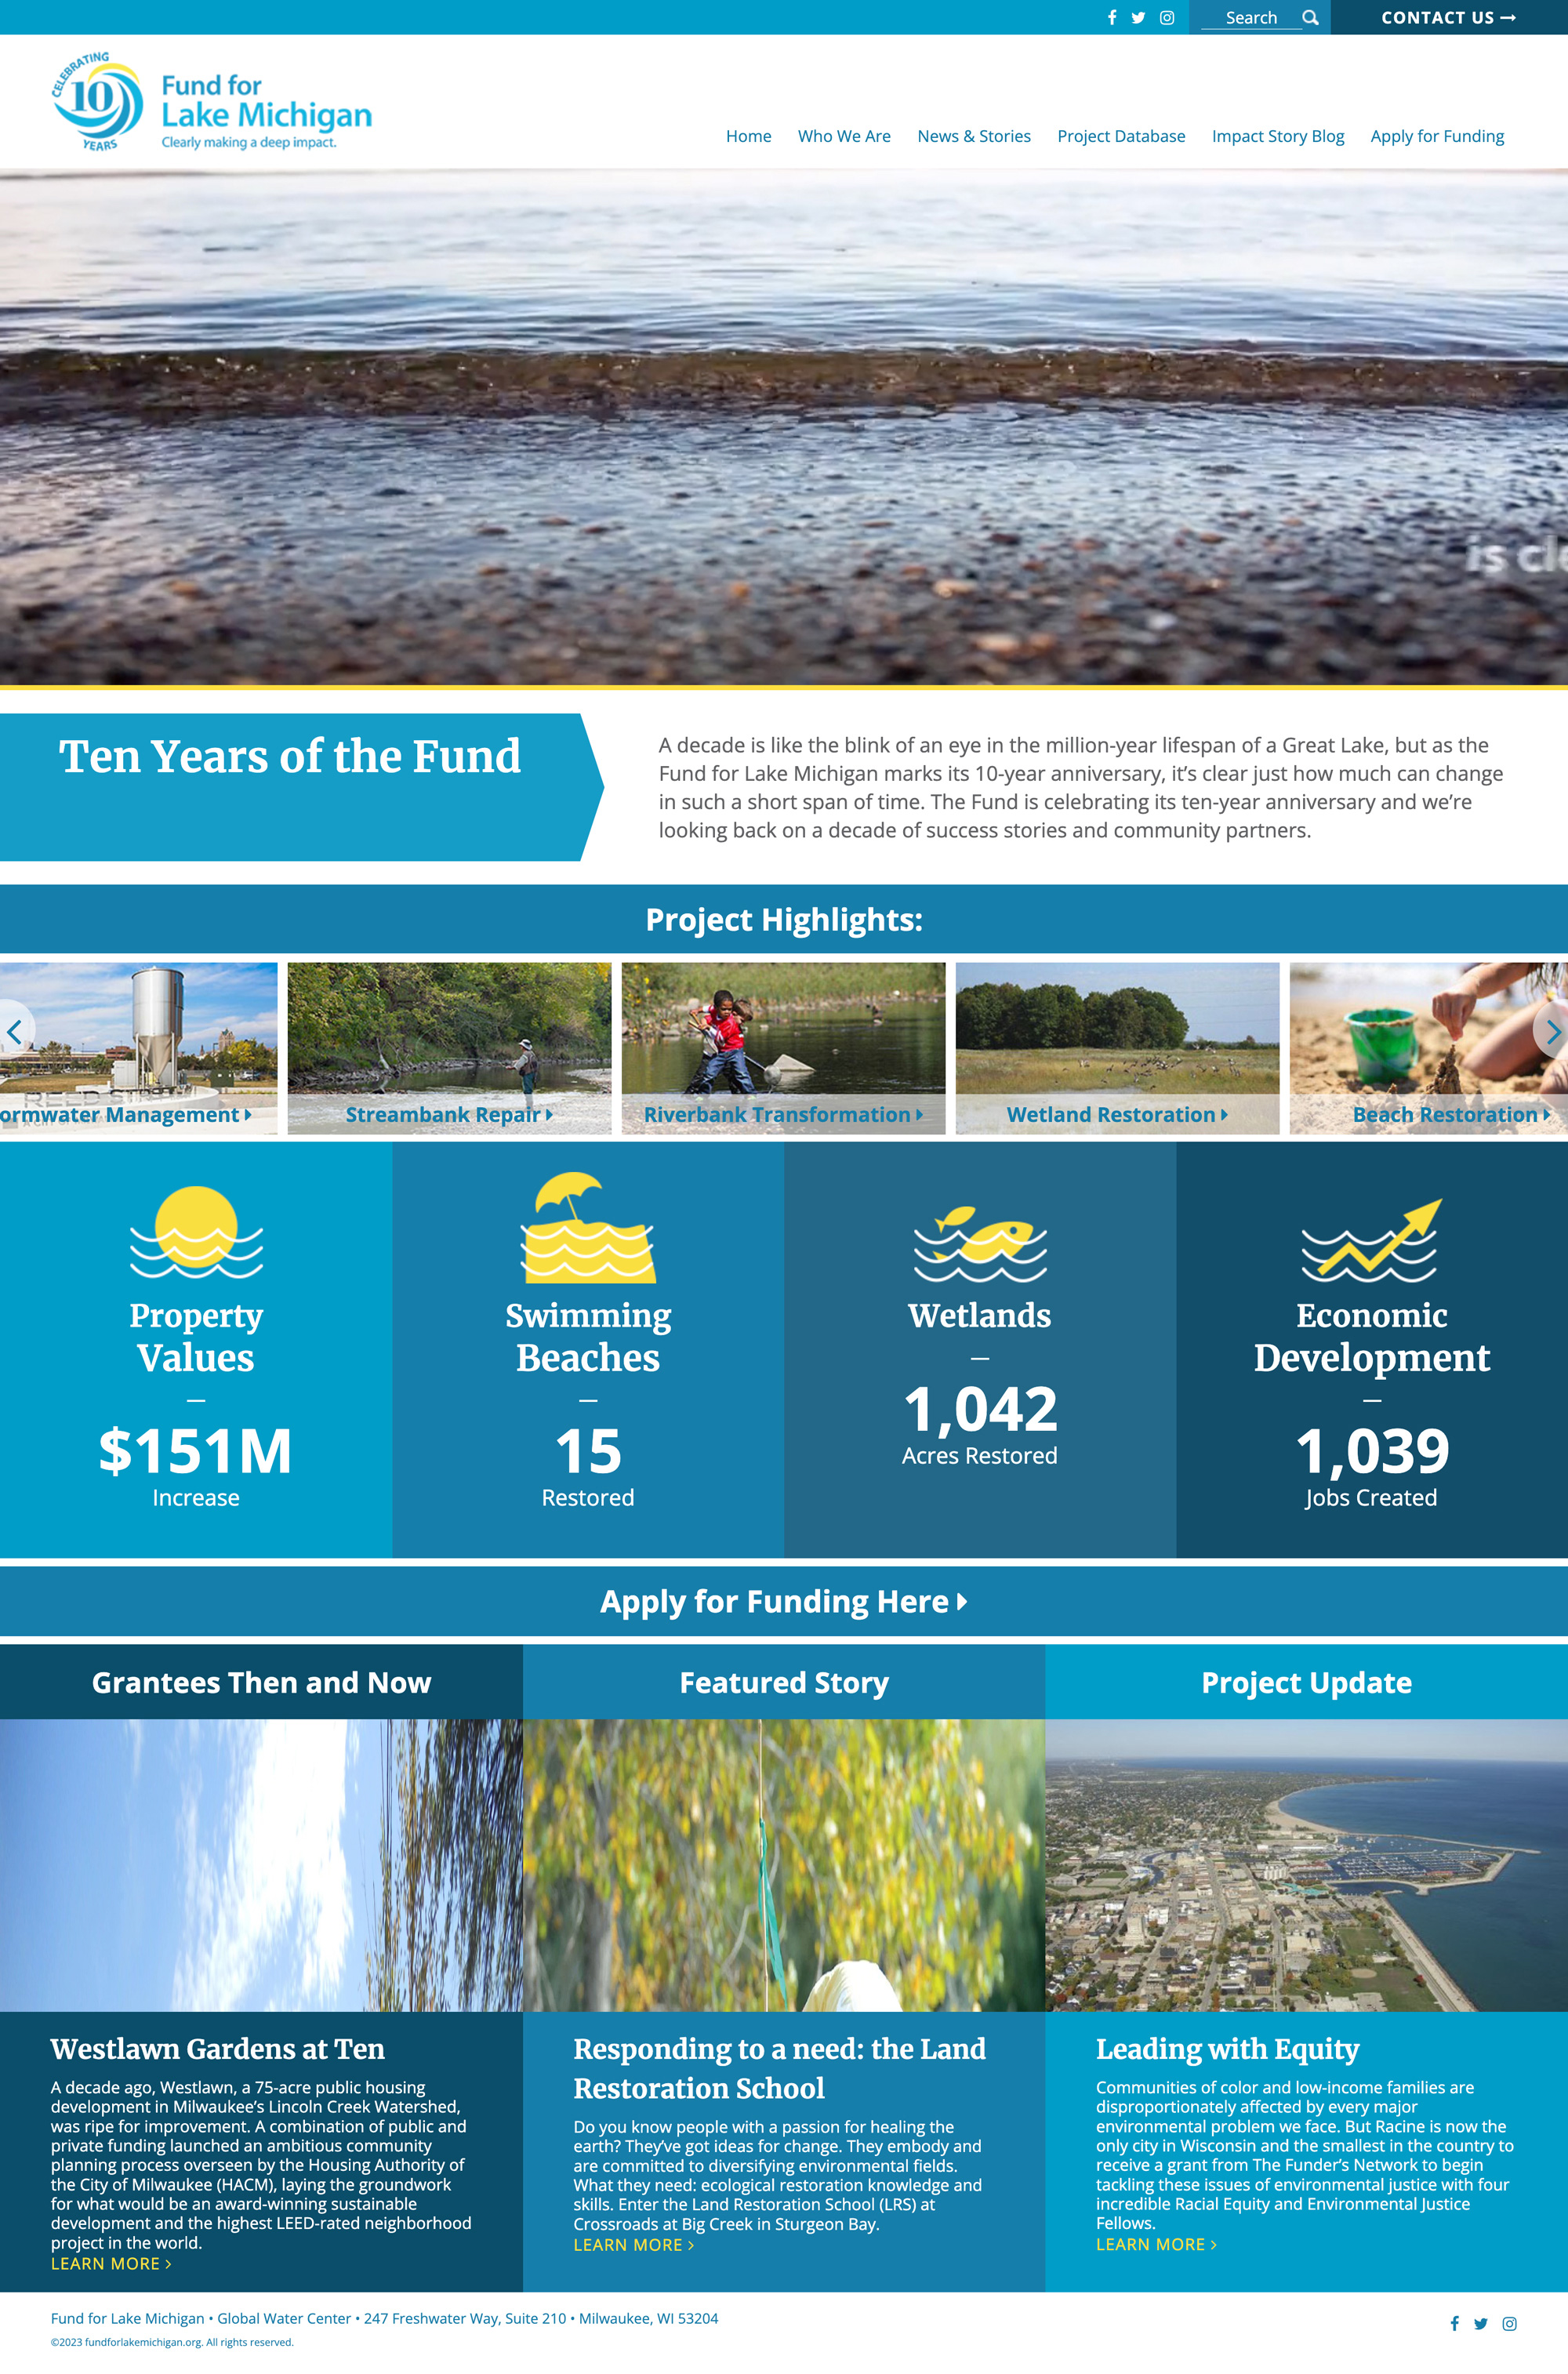 Homepage design for Funds for Lake Michigan